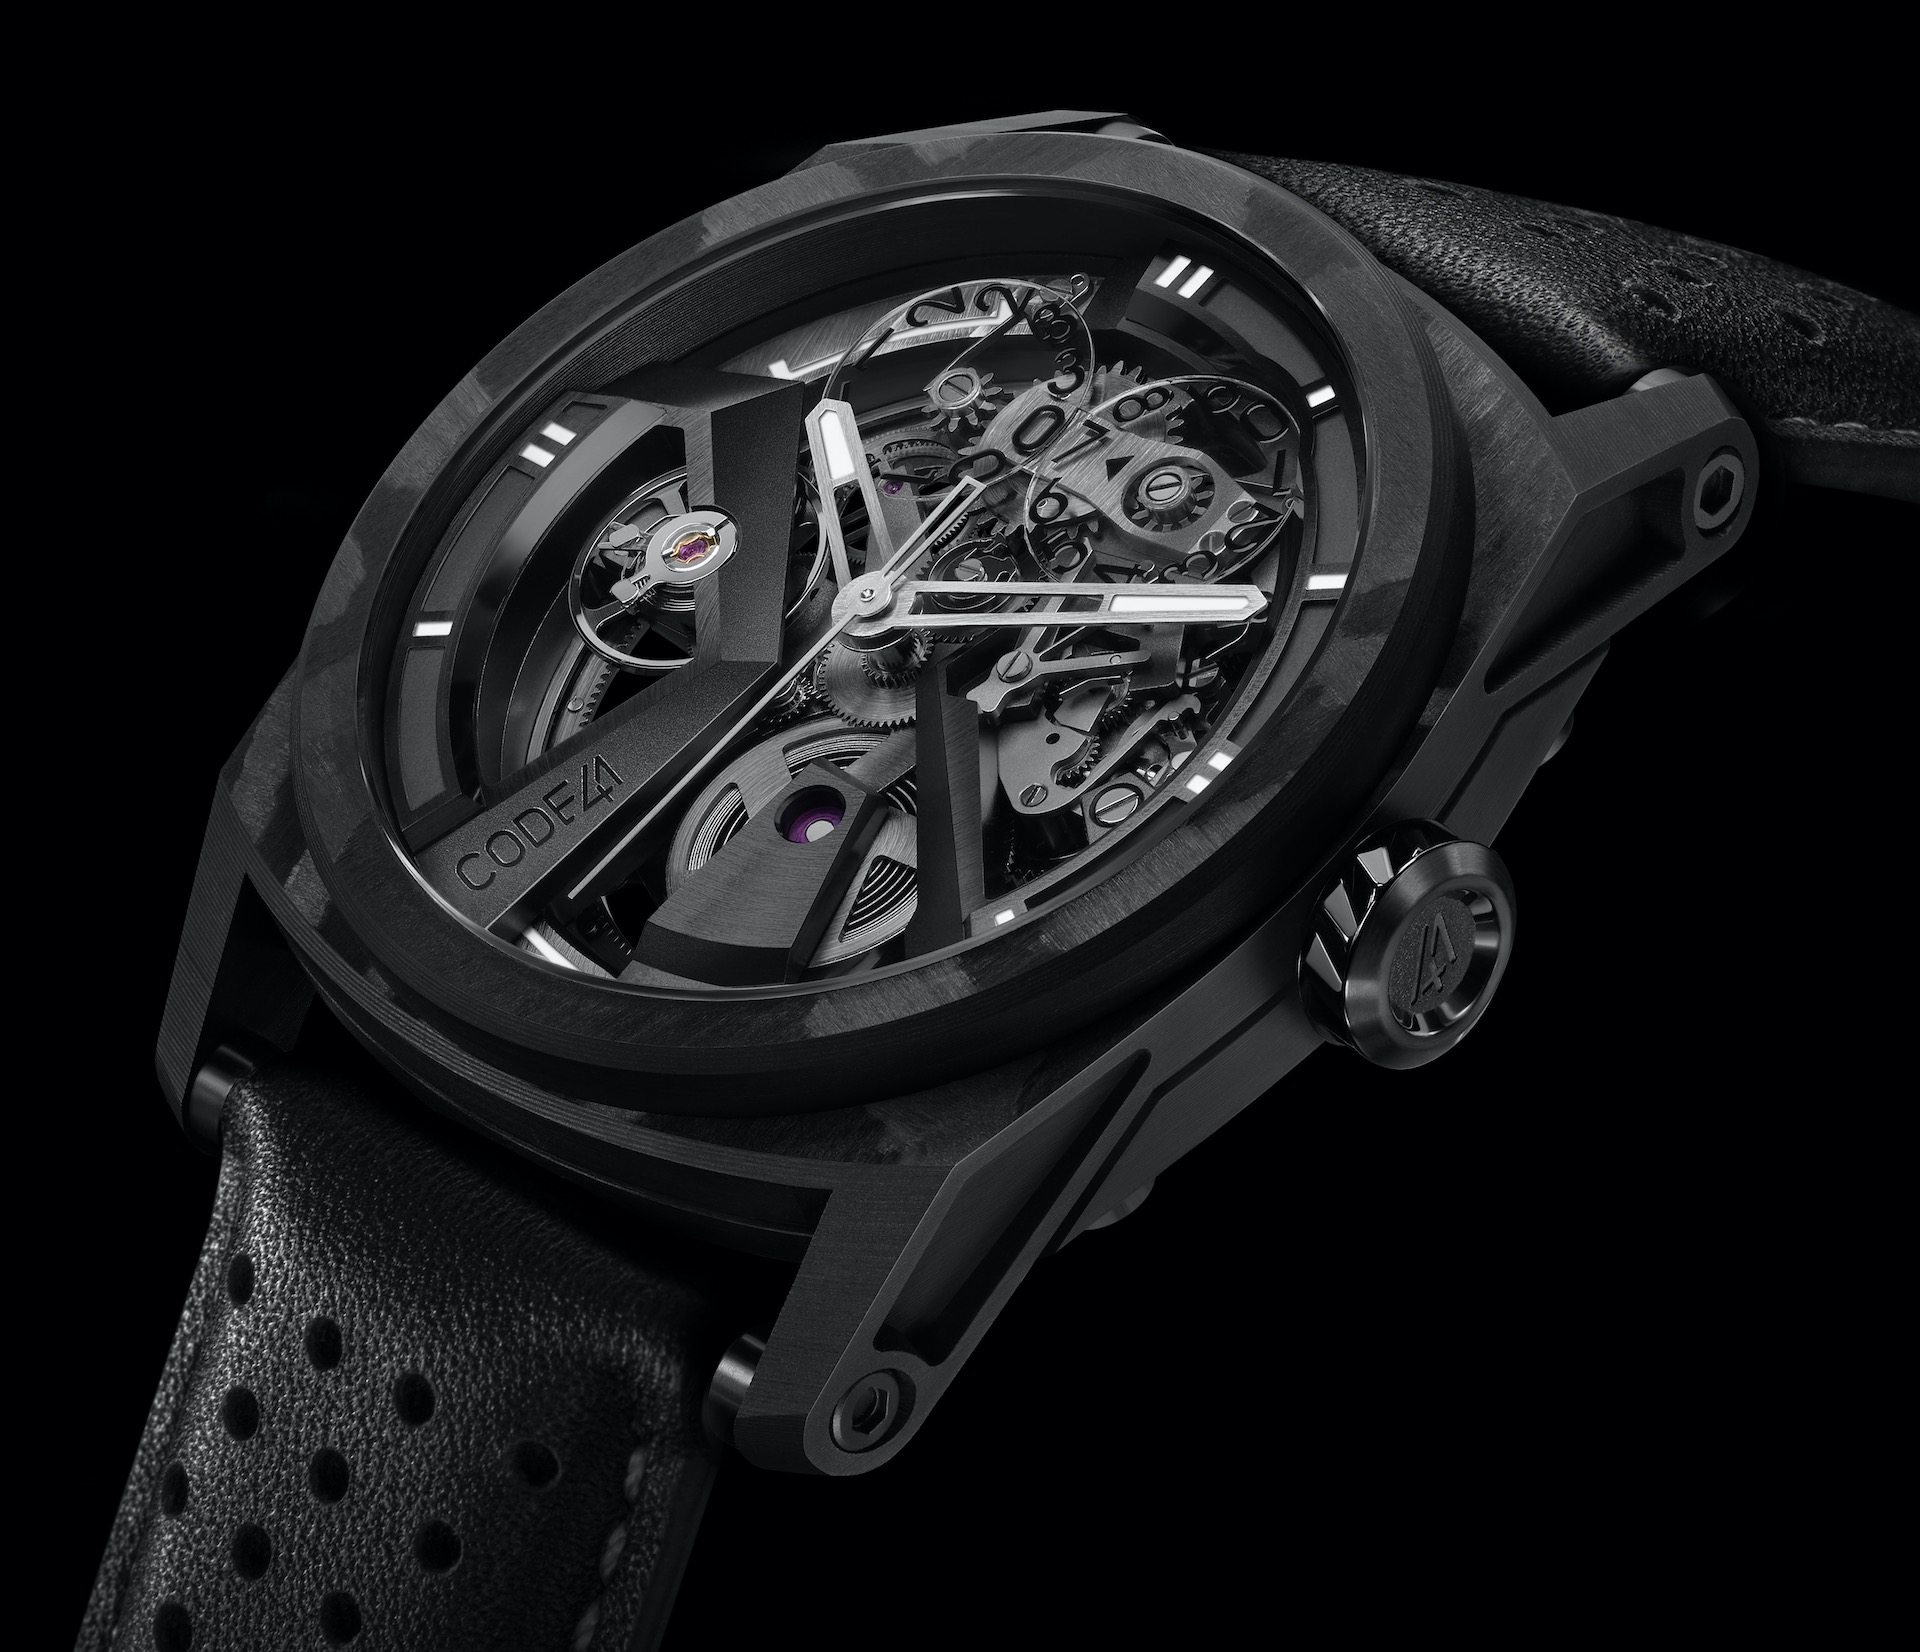 CODE41 X41: Edition 4 AeroCarbon Offers High-End Swiss Watchmaking